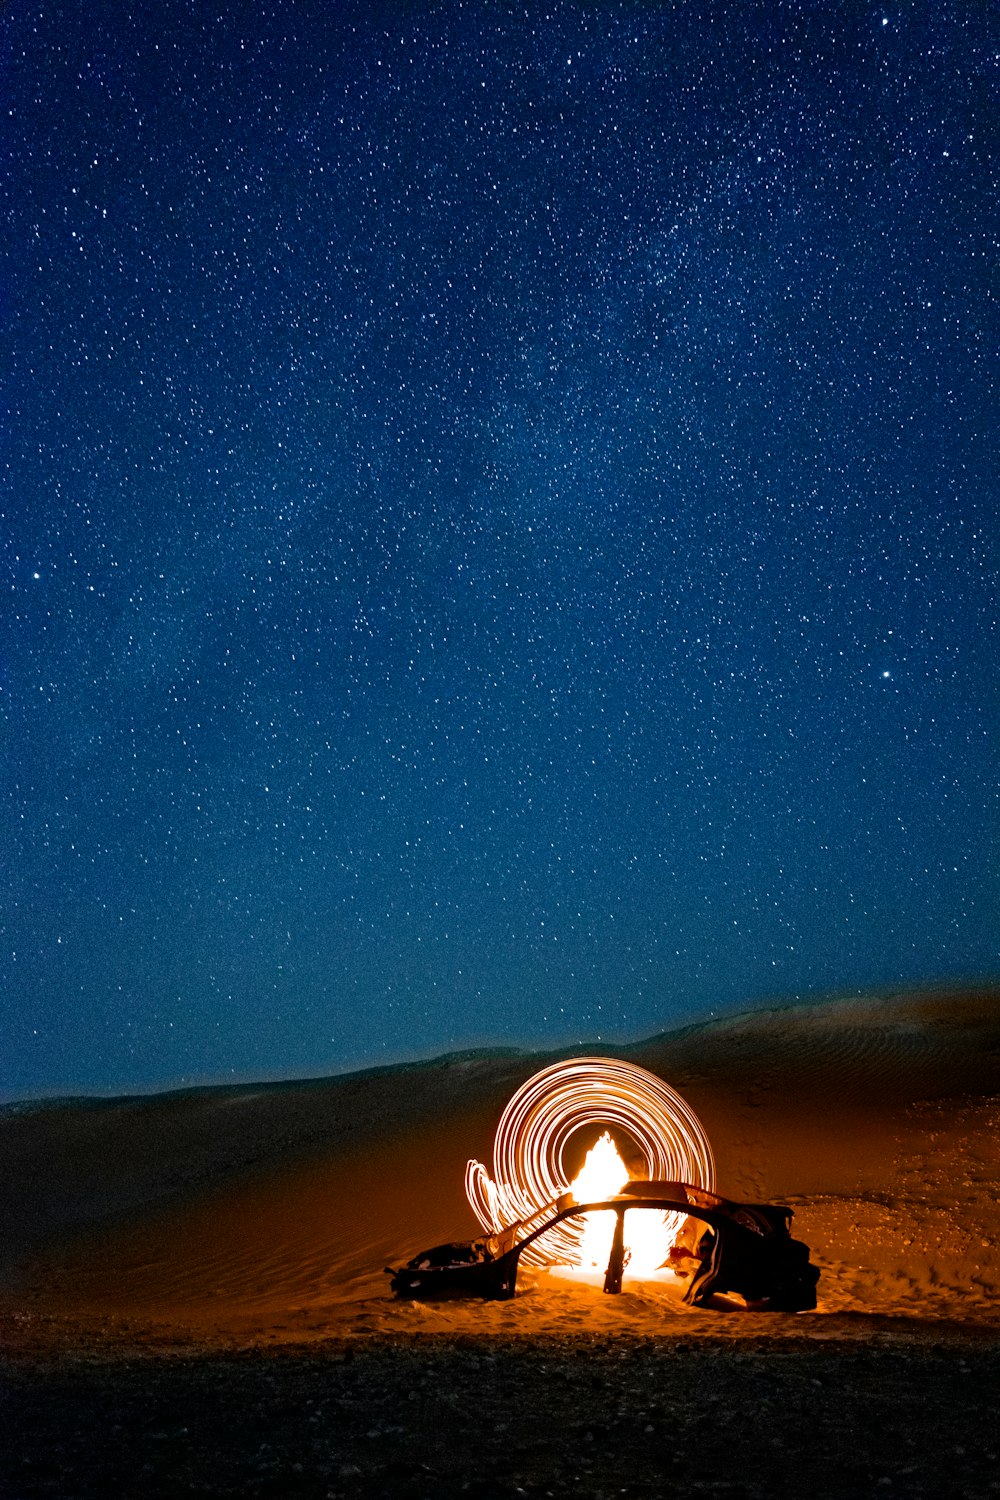 a person sitting in front of a campfire under a night sky filled with stars